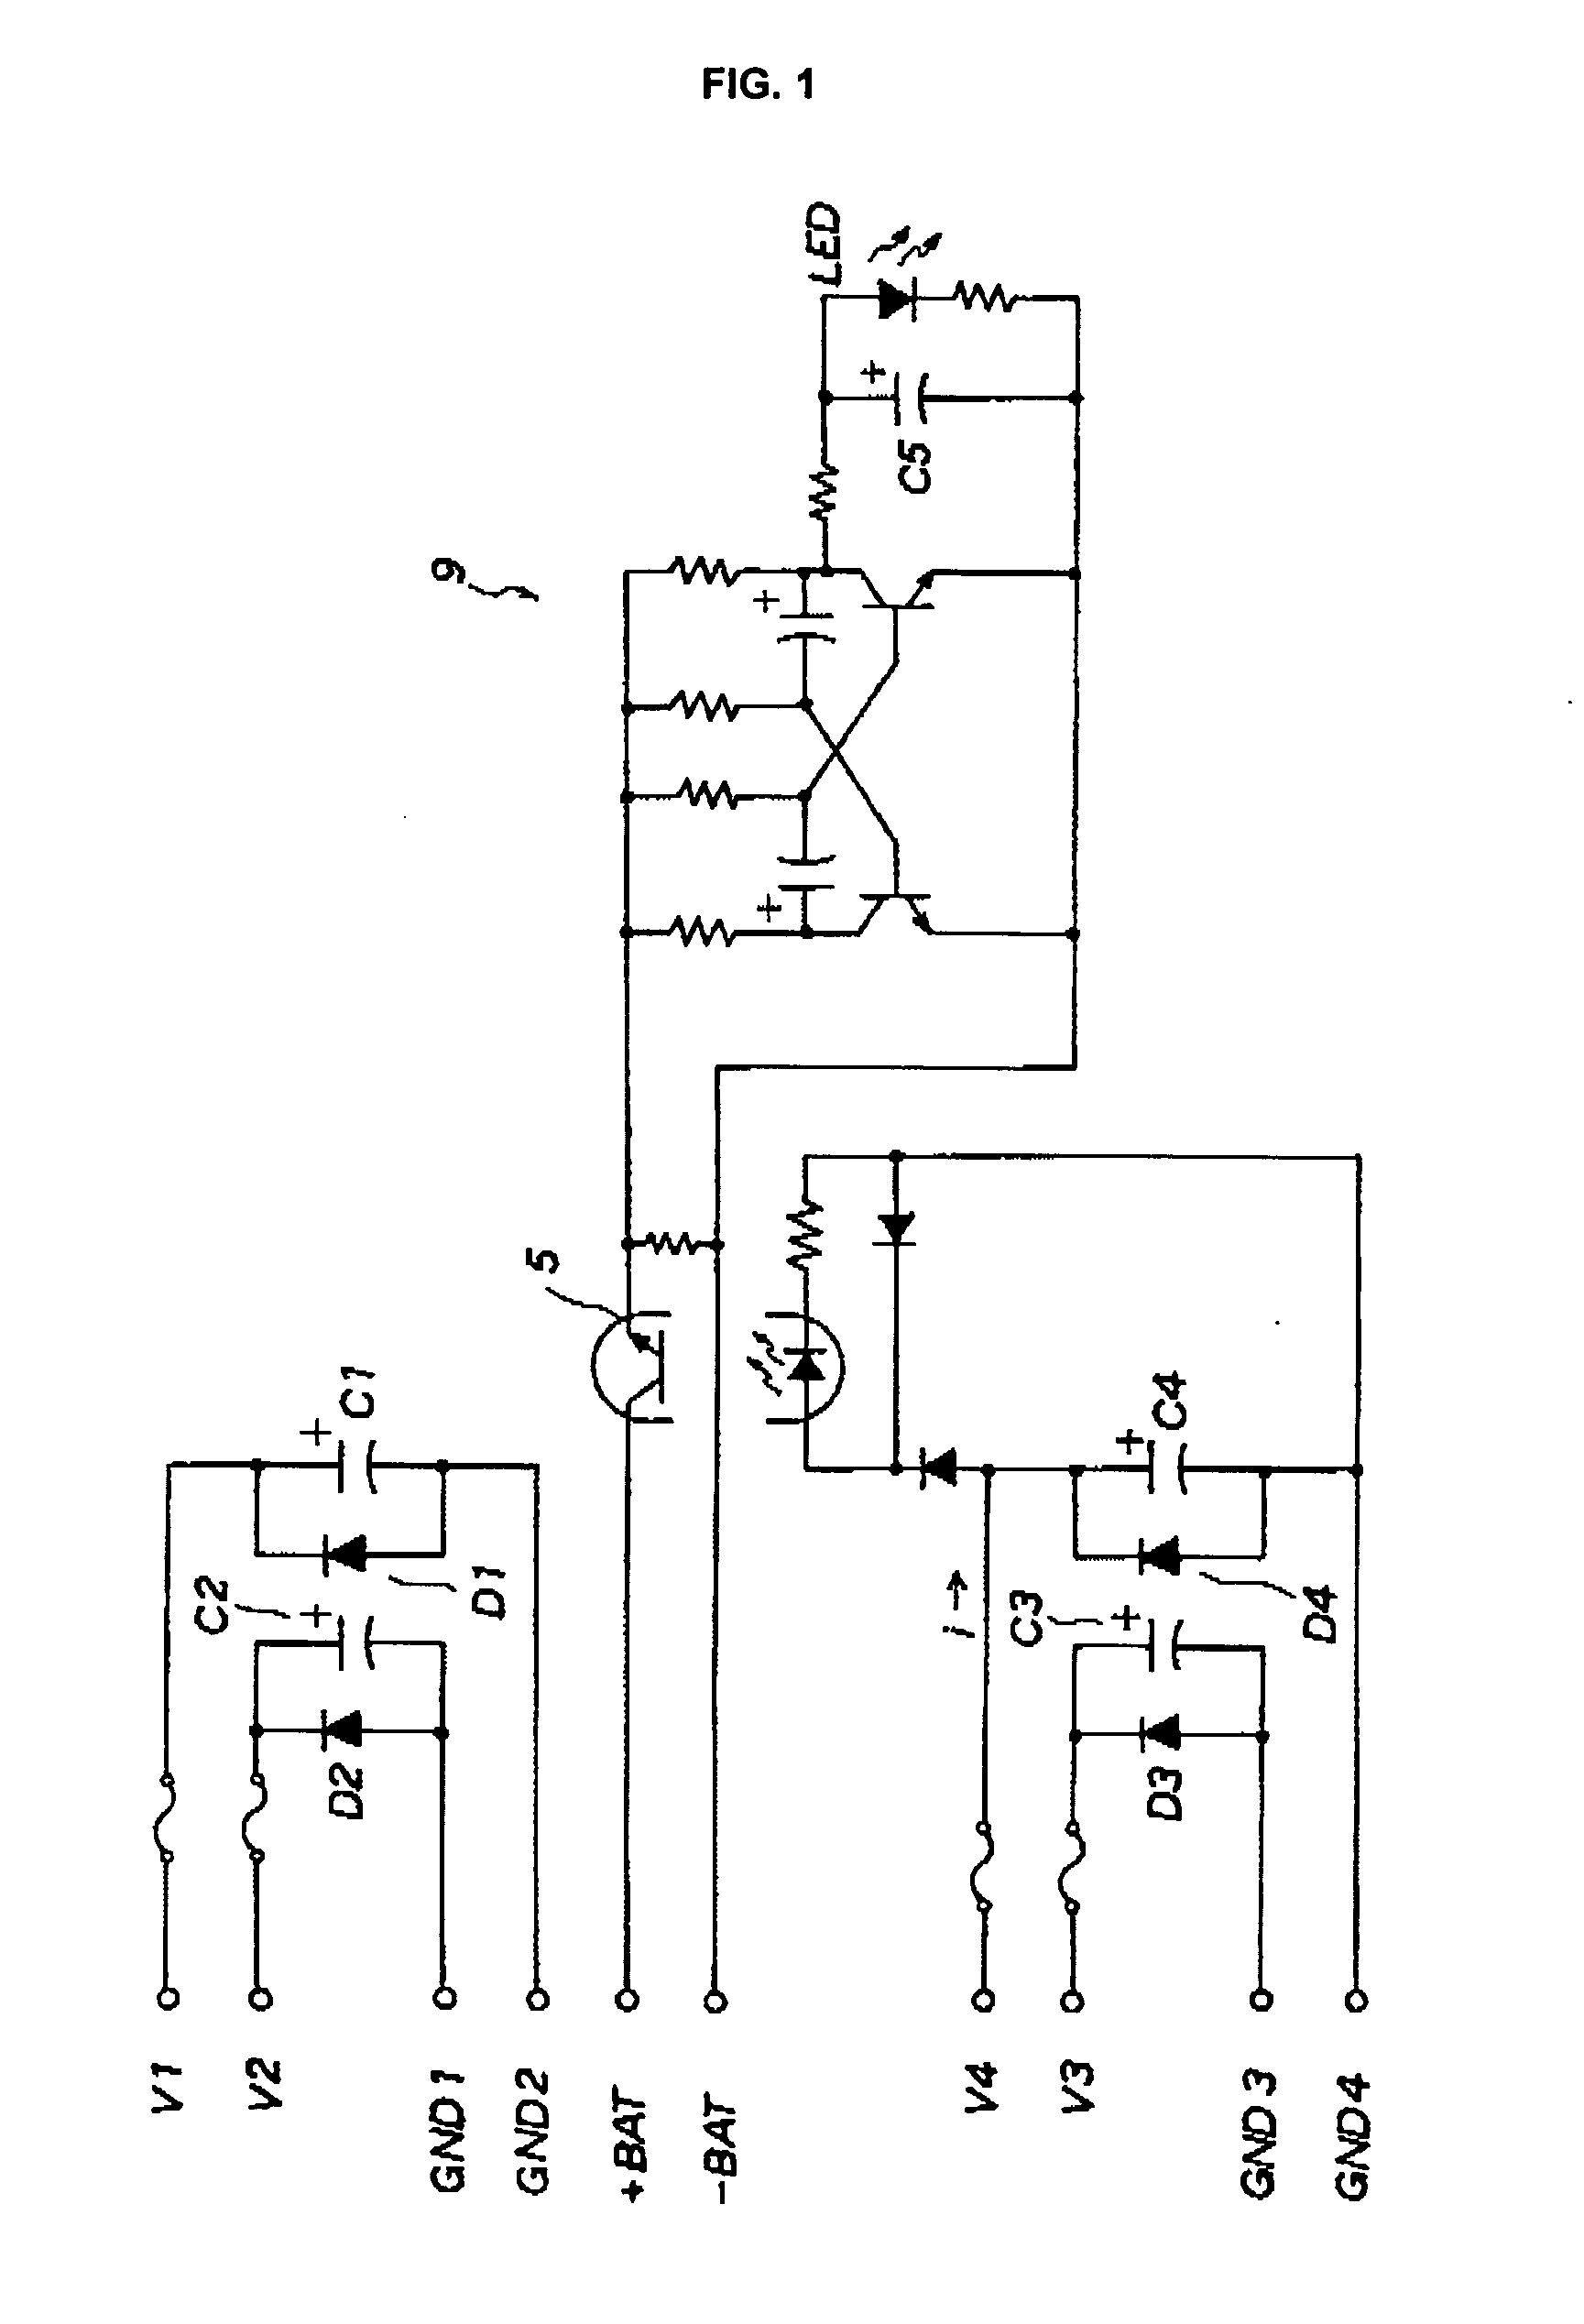 Auxiliary device for engine spark plug ignition